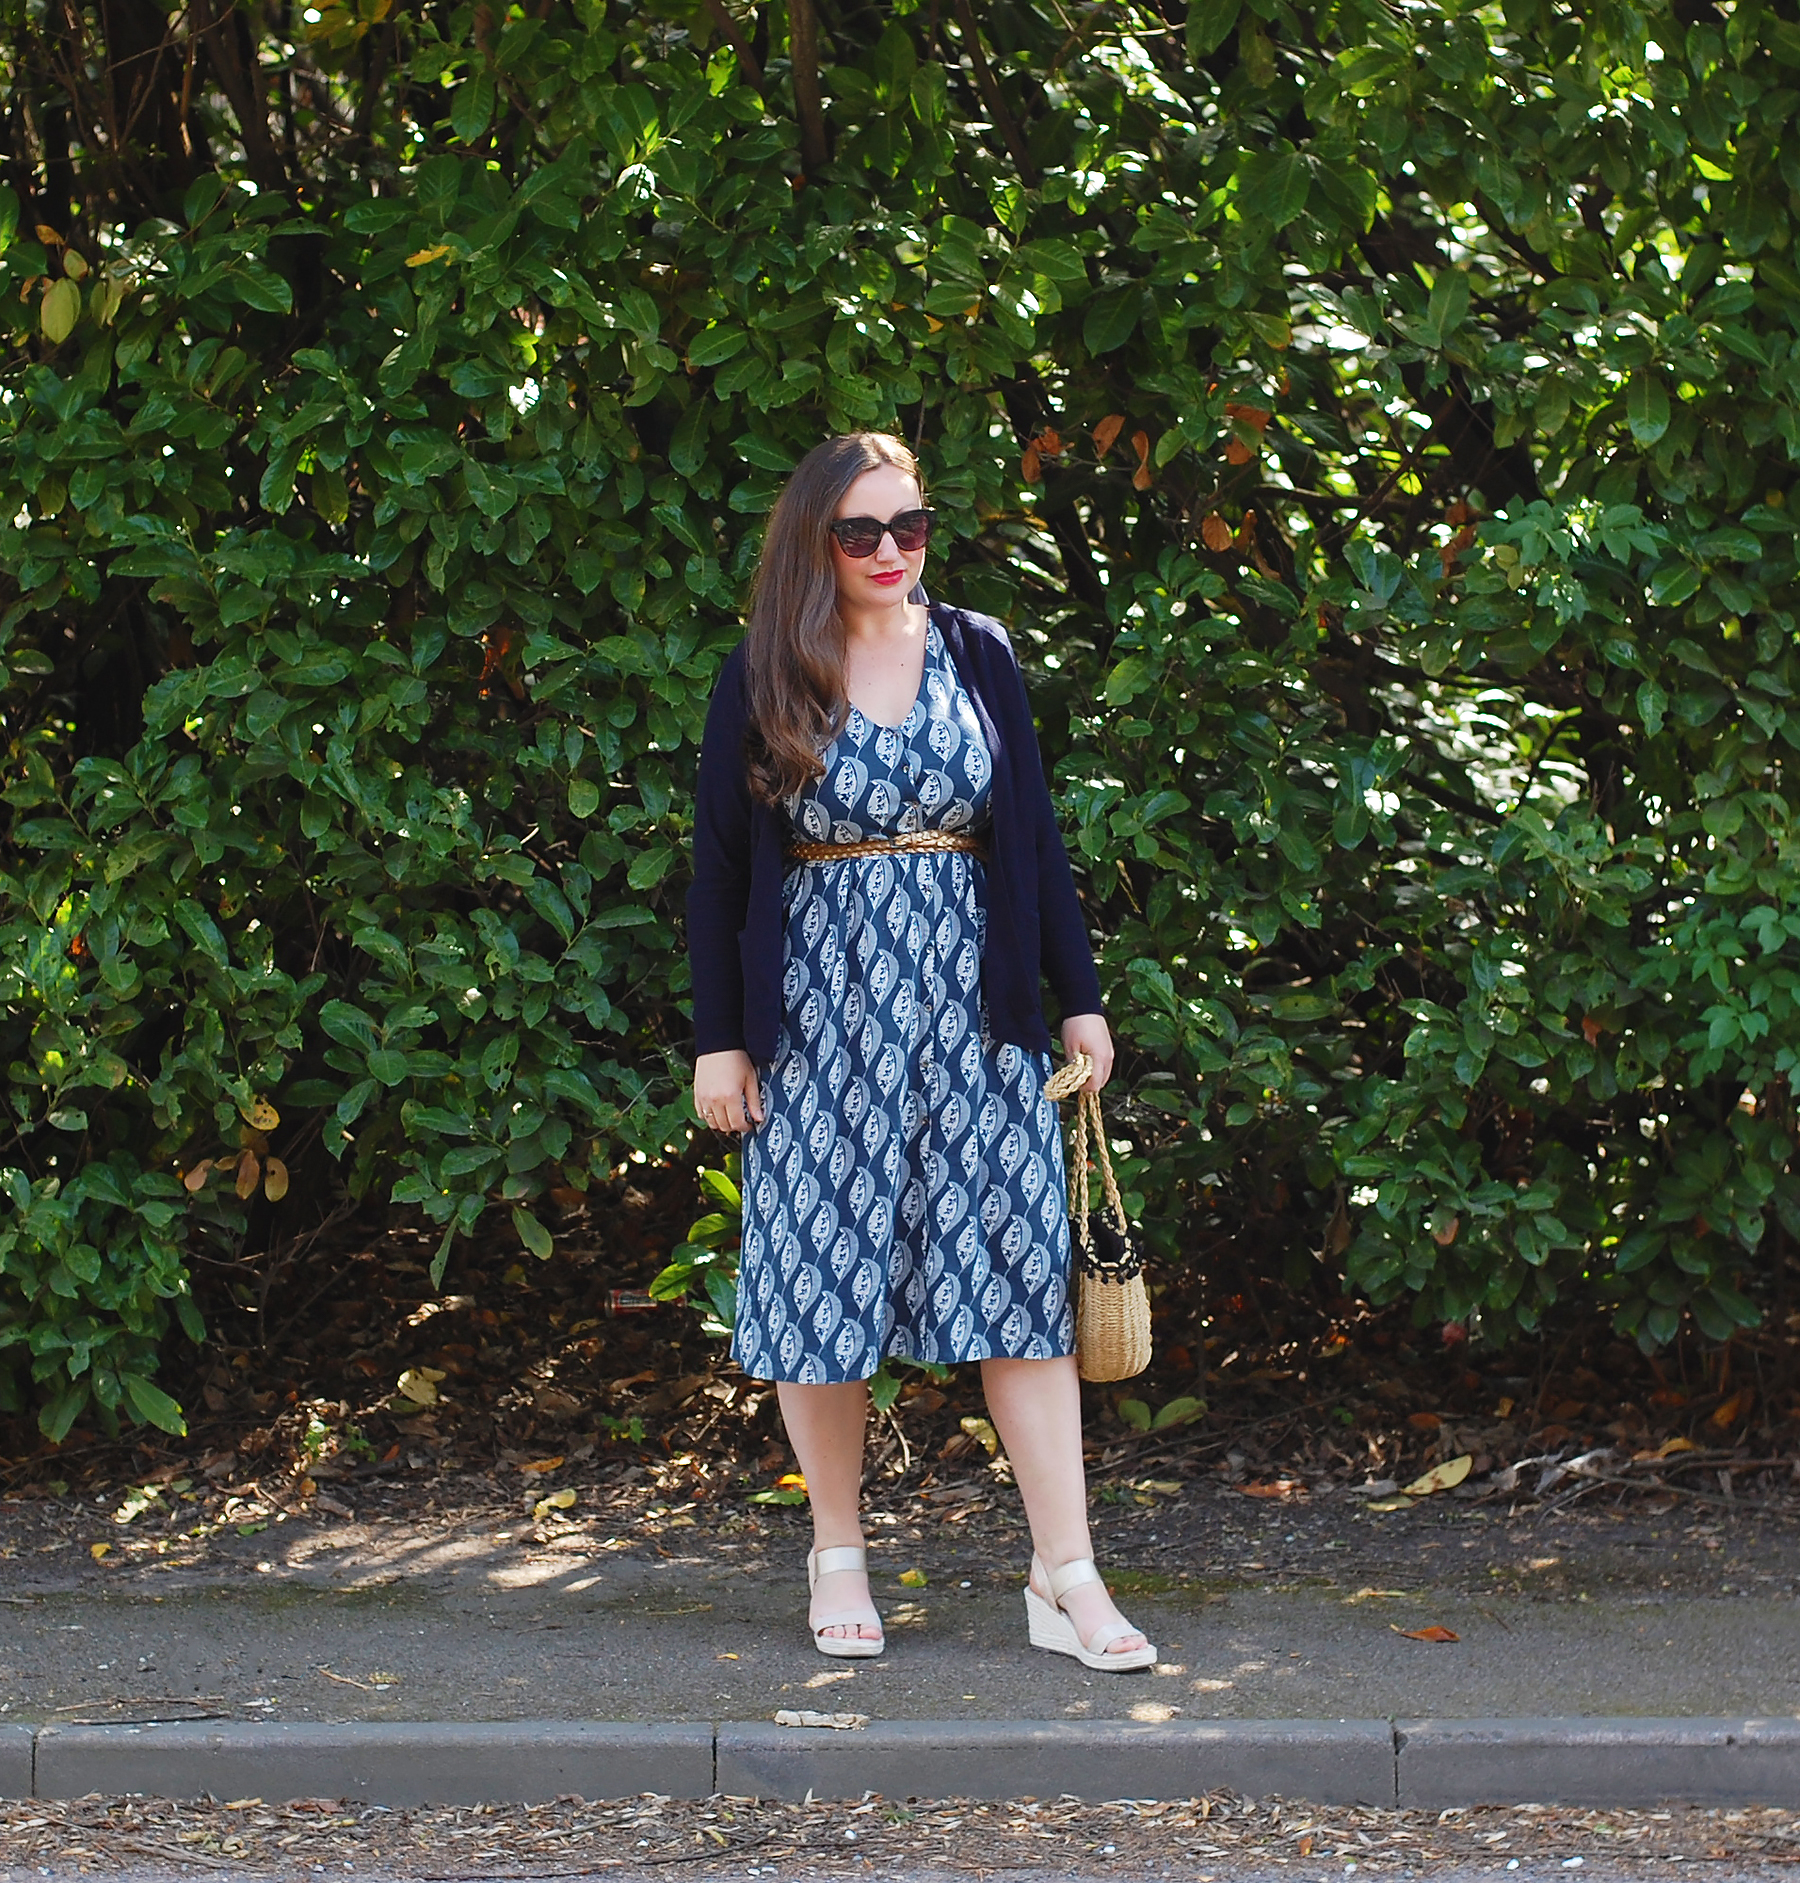 Blue Printed Midi Dress Outfit With Navy Cardigan And Gold Details